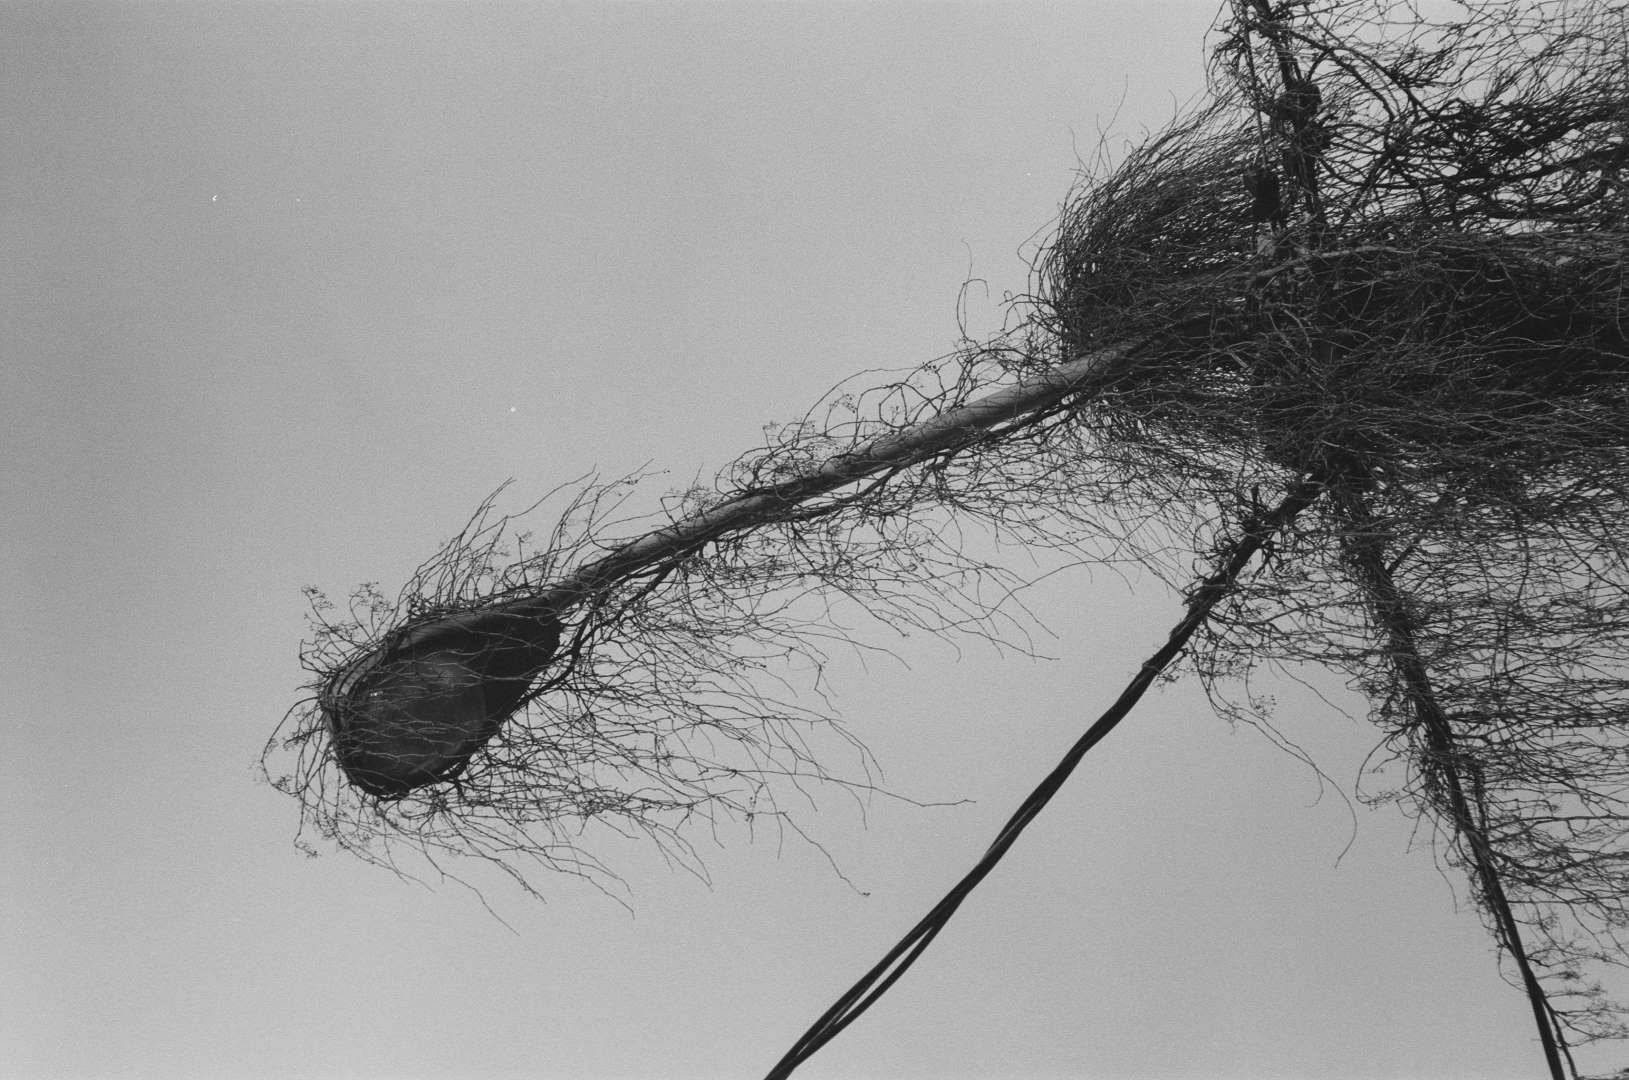 A black & white photograph of a street lamp overgrown with vines, mornful